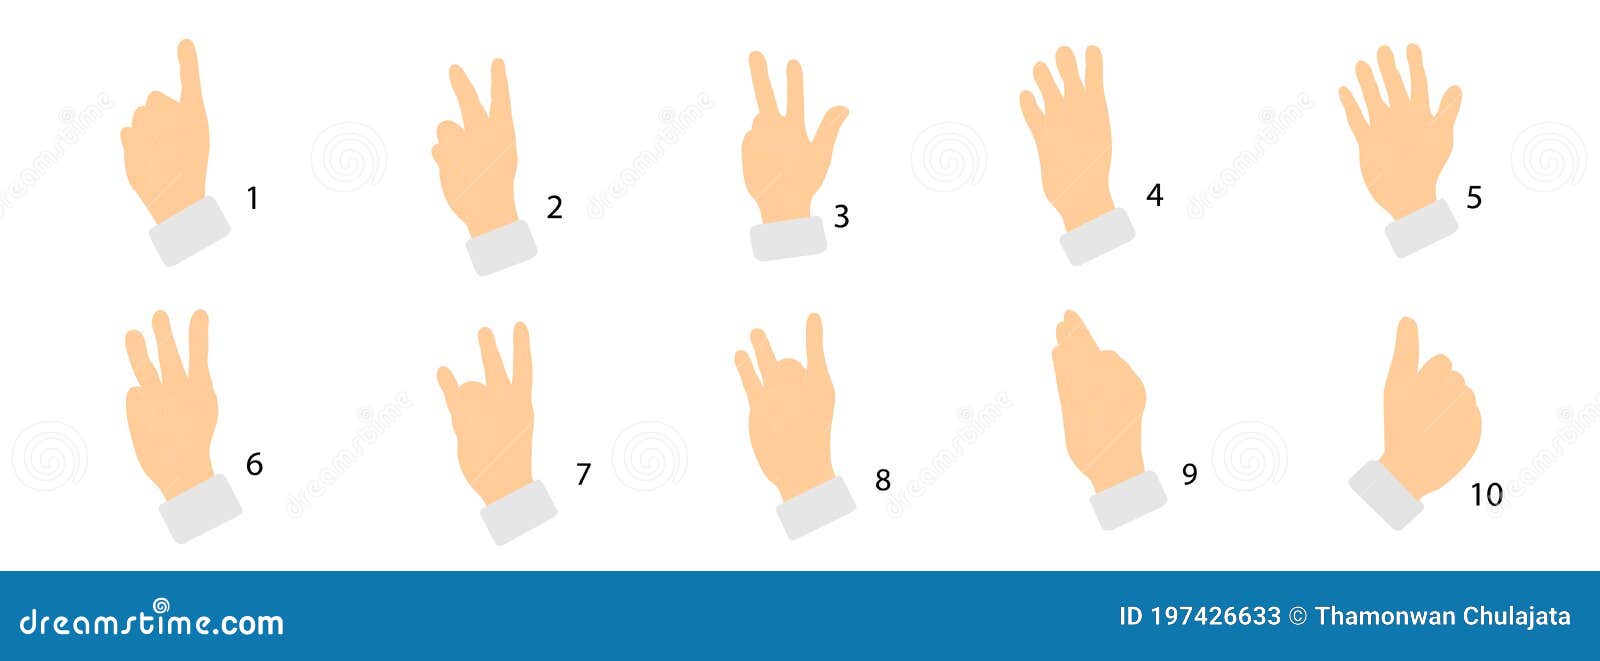 Hands Counting in Sign Language Stock Vector - Illustration of gesture ...